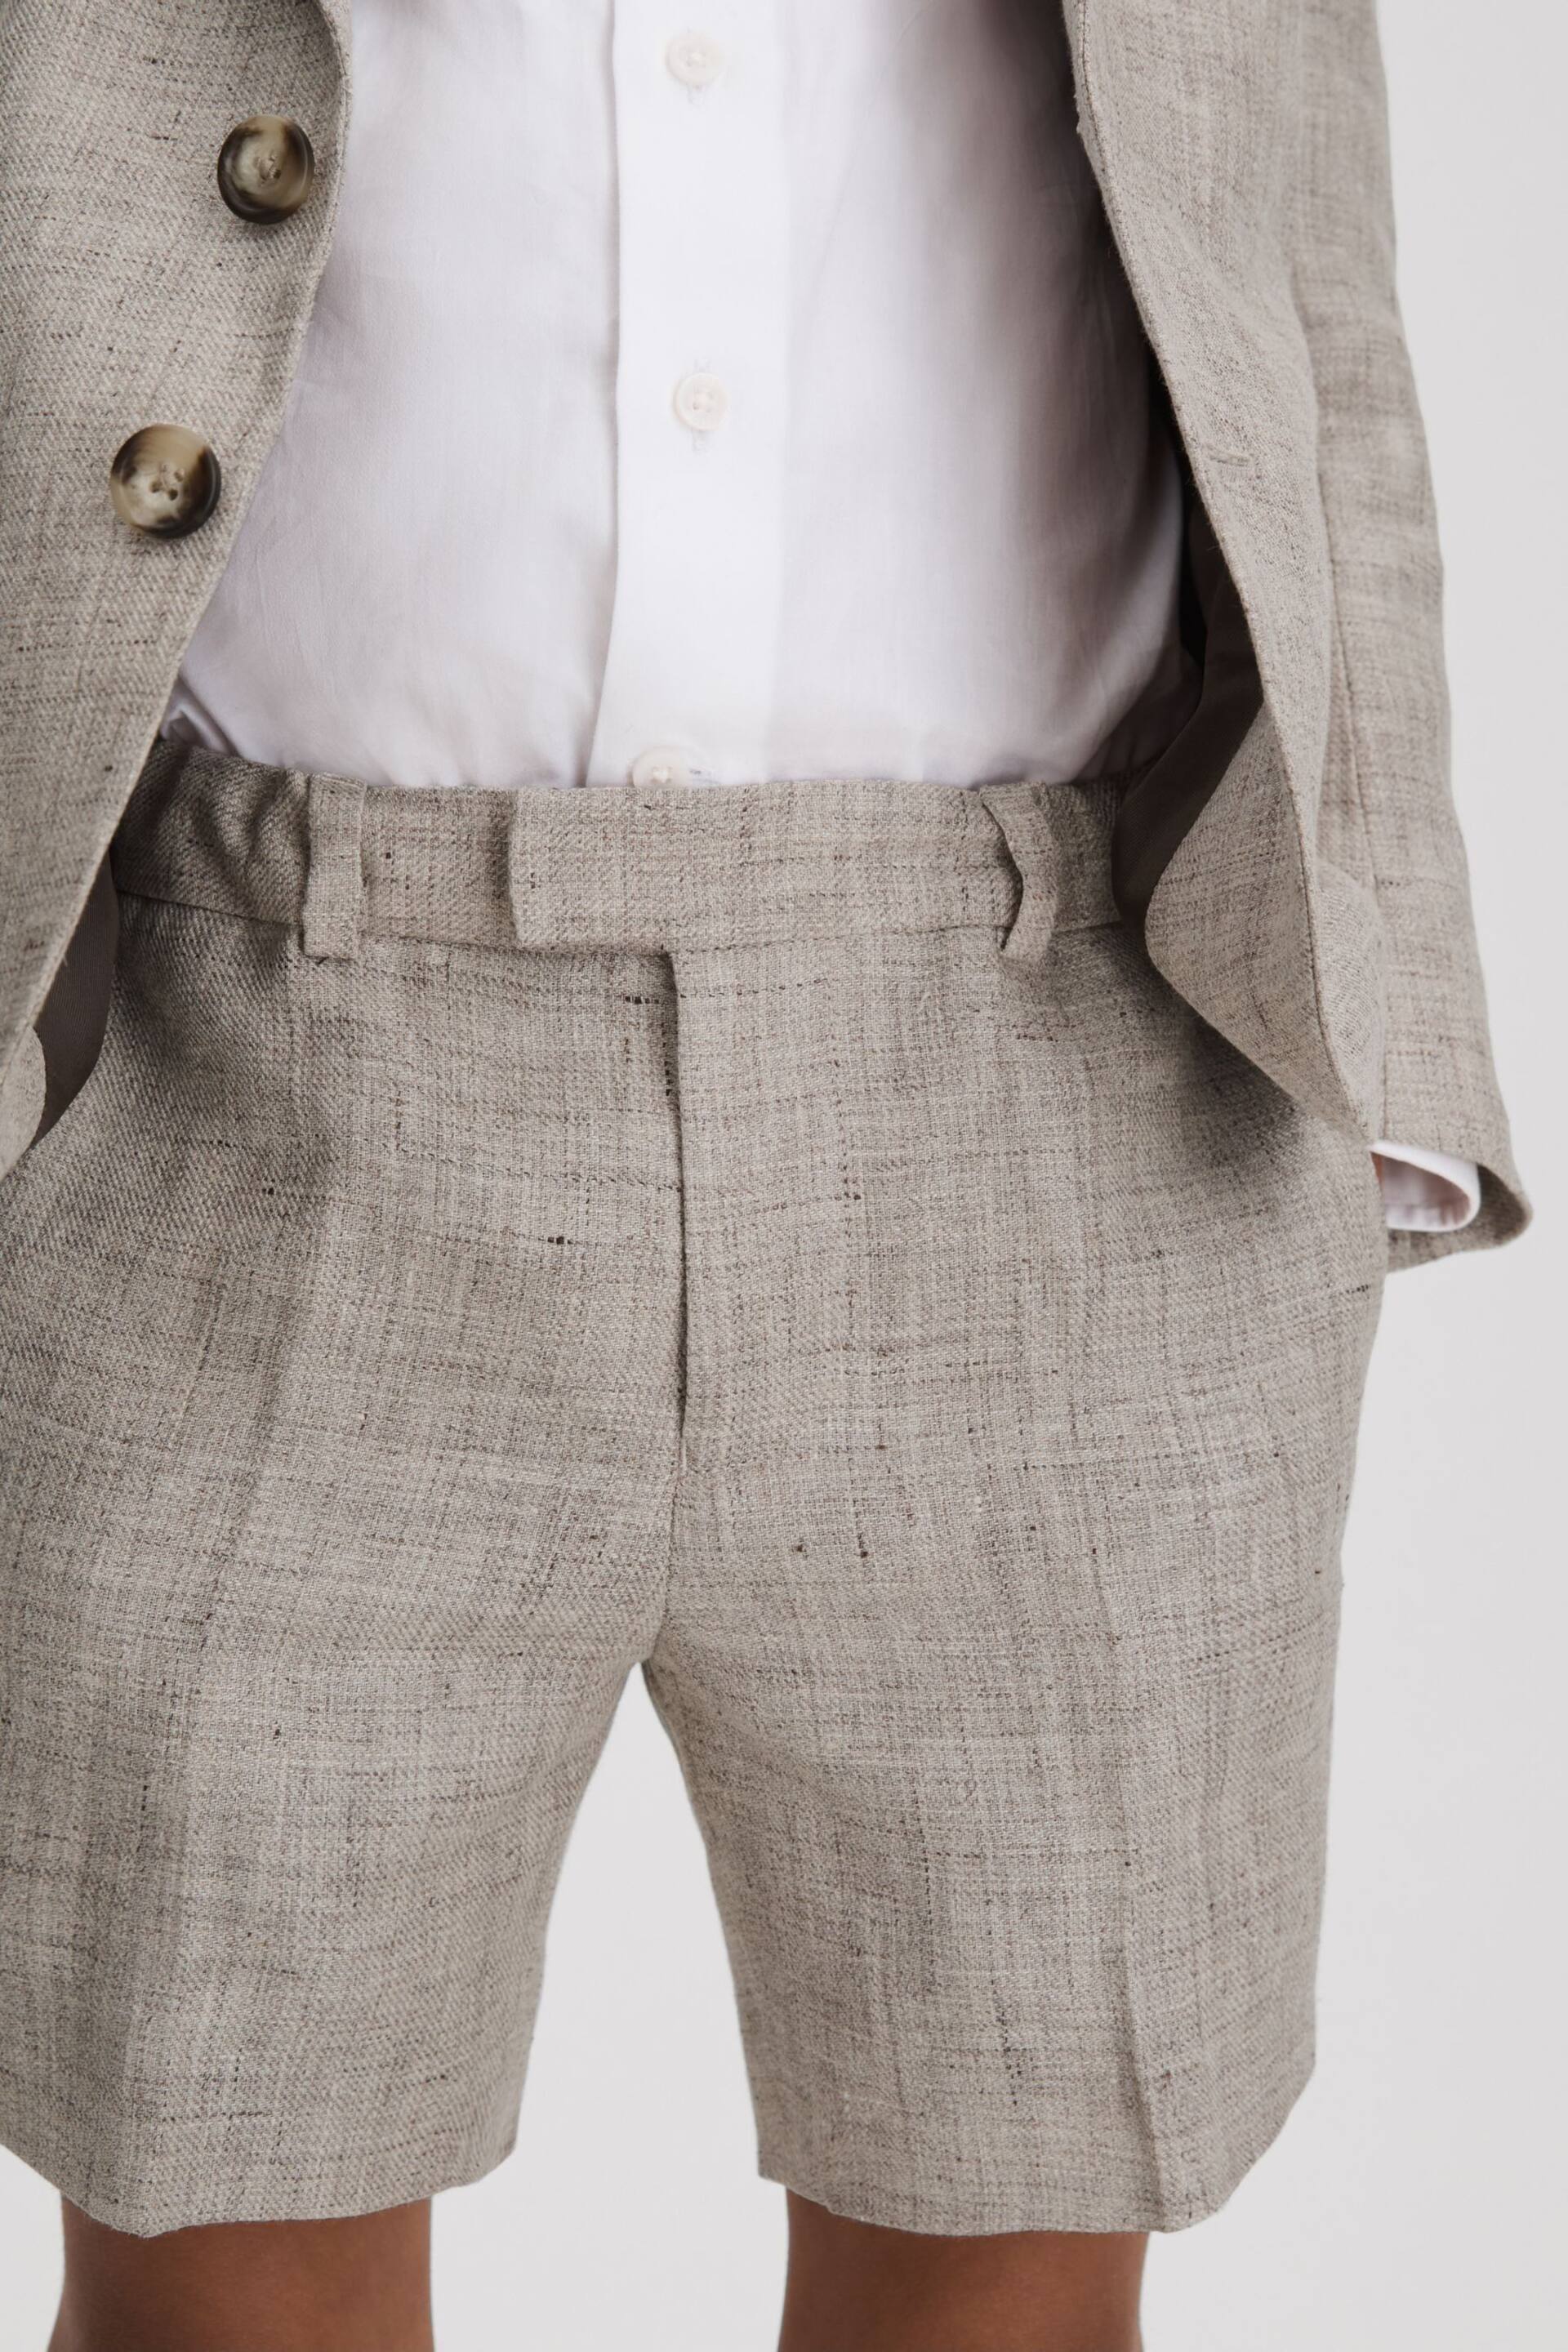 Reiss Oatmeal Auto Junior Tailored Linen Side Adjuster Shorts - Image 3 of 4